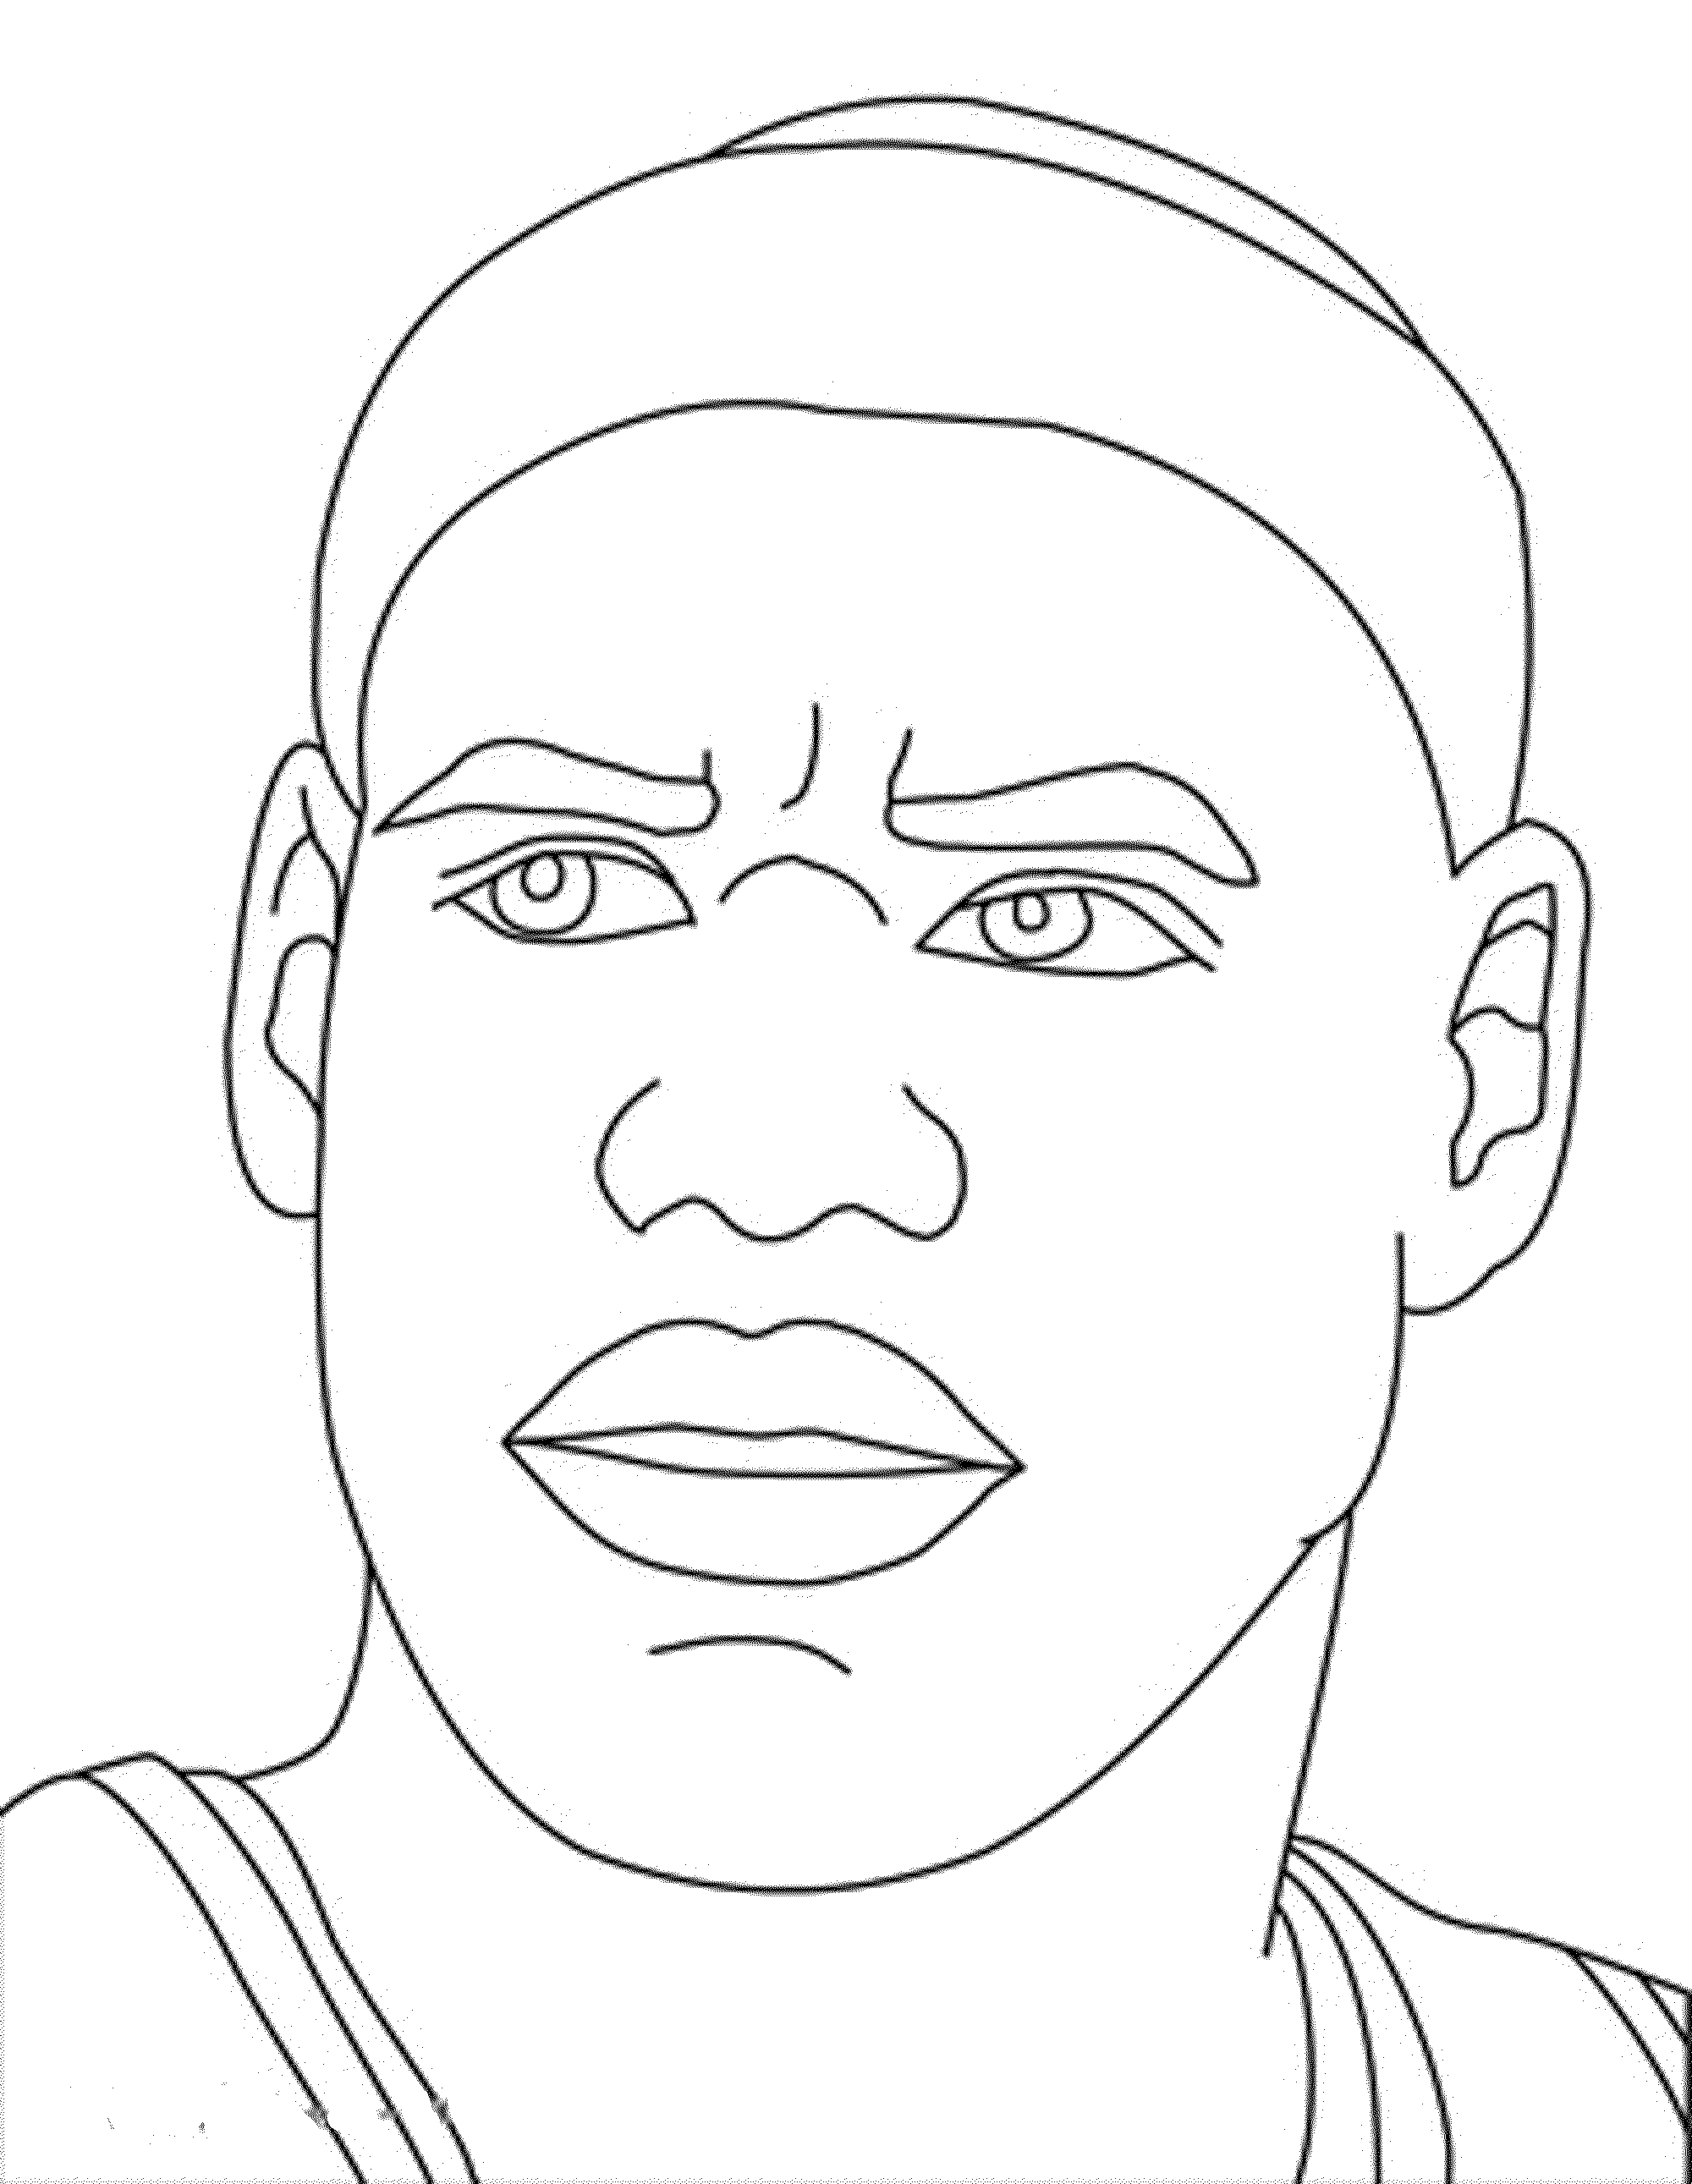 LeBron James coloring page  Free Printable Coloring Pages